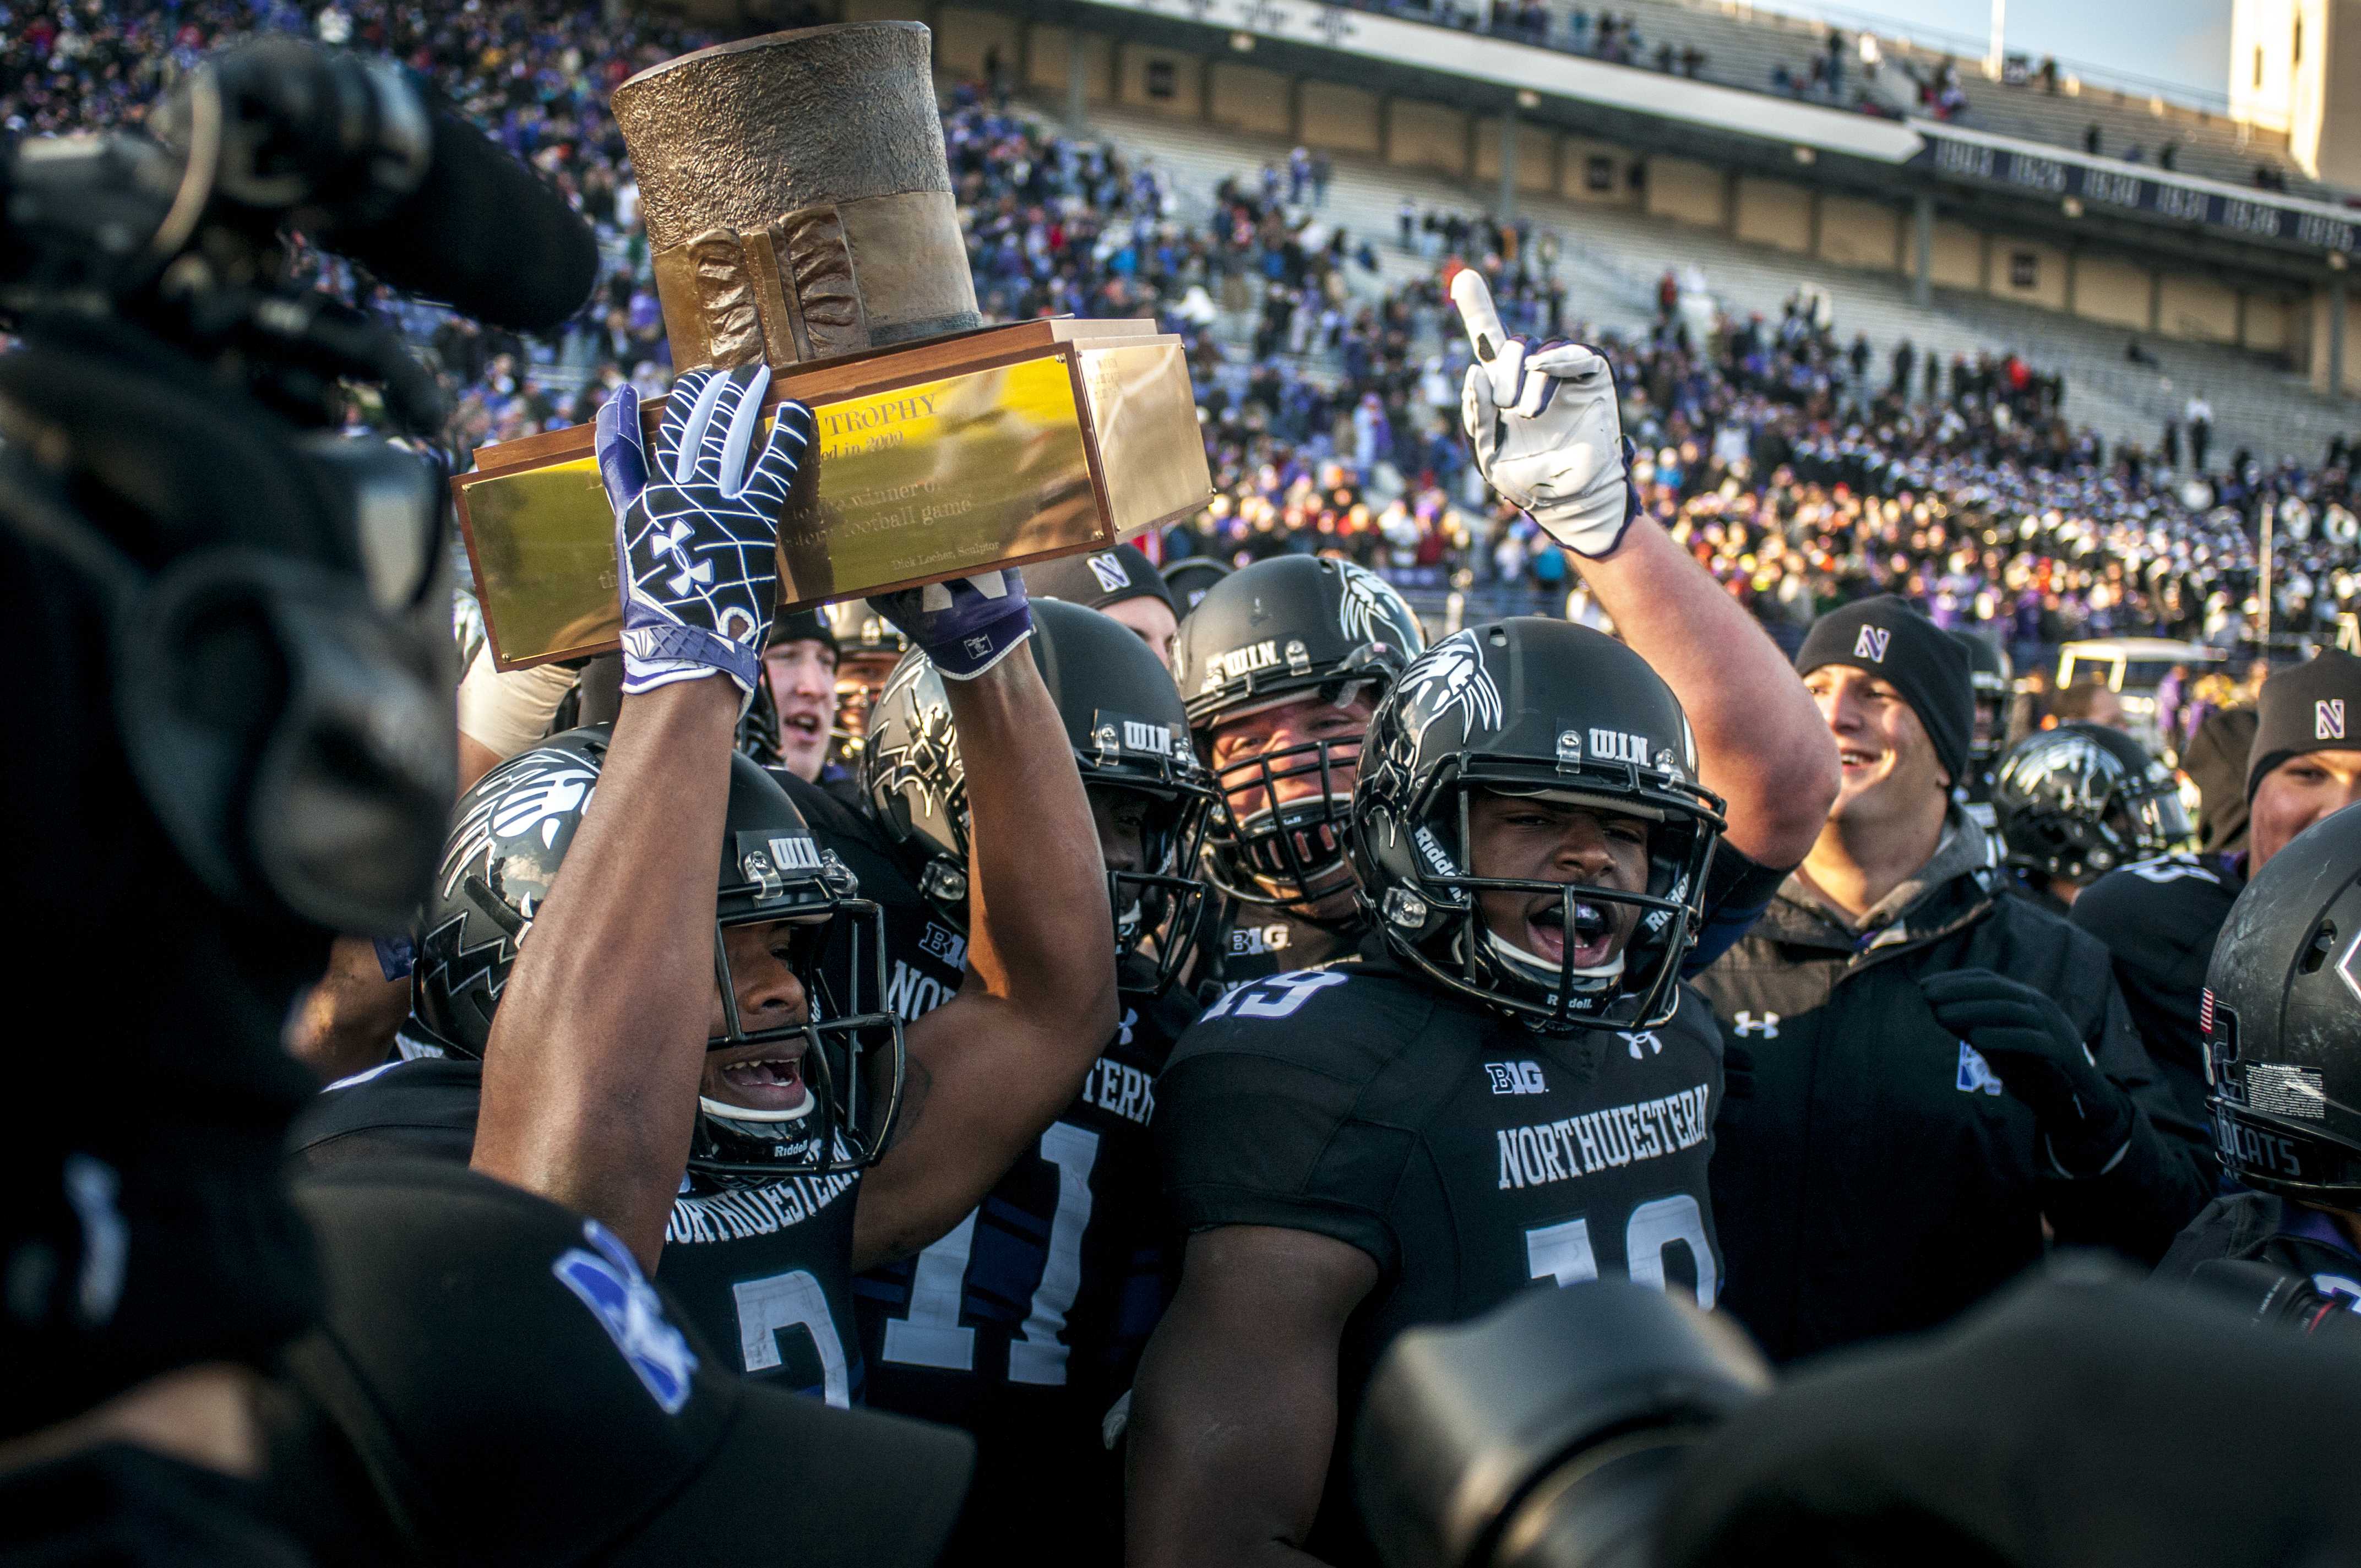 Football Northwestern runs over Illinois to reclaim Land of Lincoln Trophy